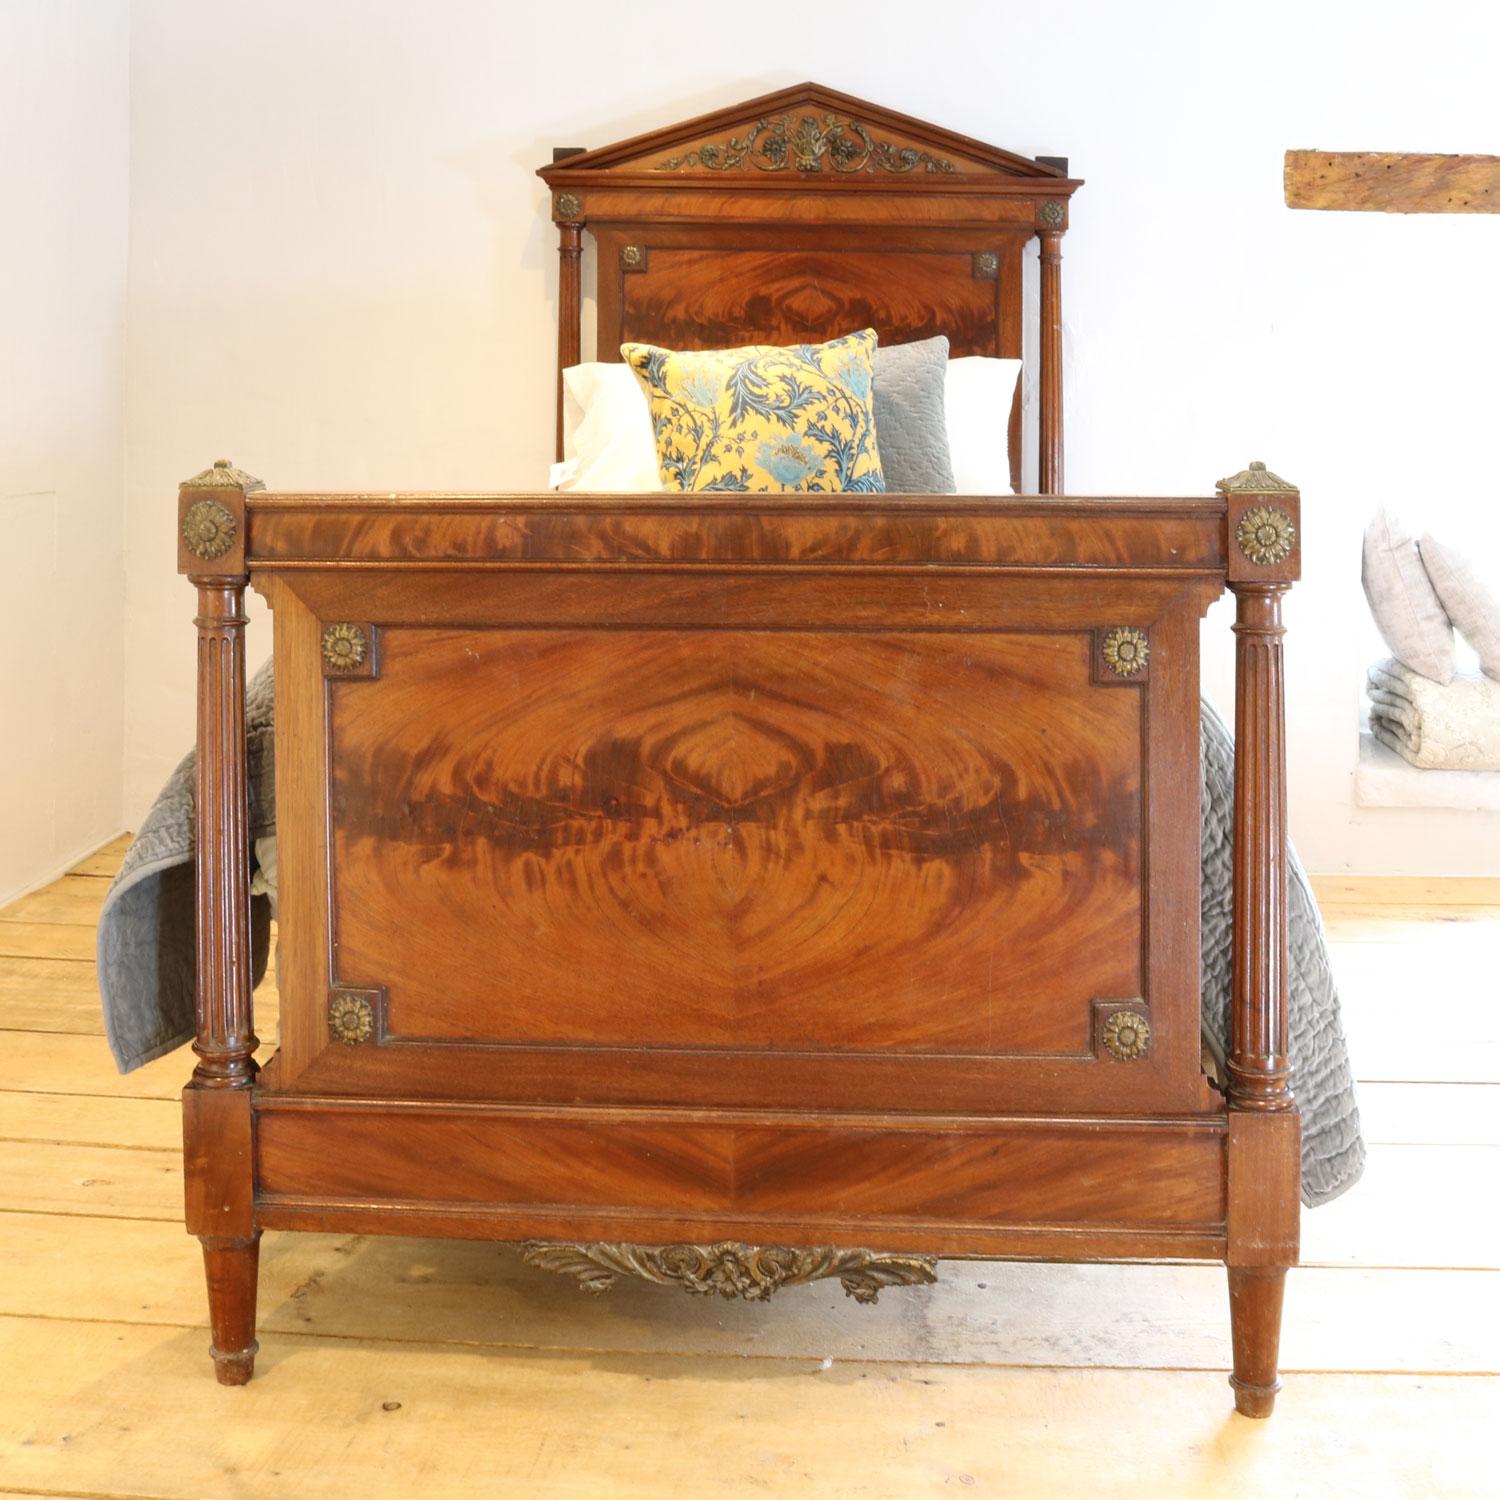 French Empire style antique bed made from burr mahogany, with decorative flower plaques on the head and foot board and ormelou detailing. 

This bed accepts a 3ft wide by 6ft 3in (or 6ft 6in long) base and mattress.

The price is for the bed